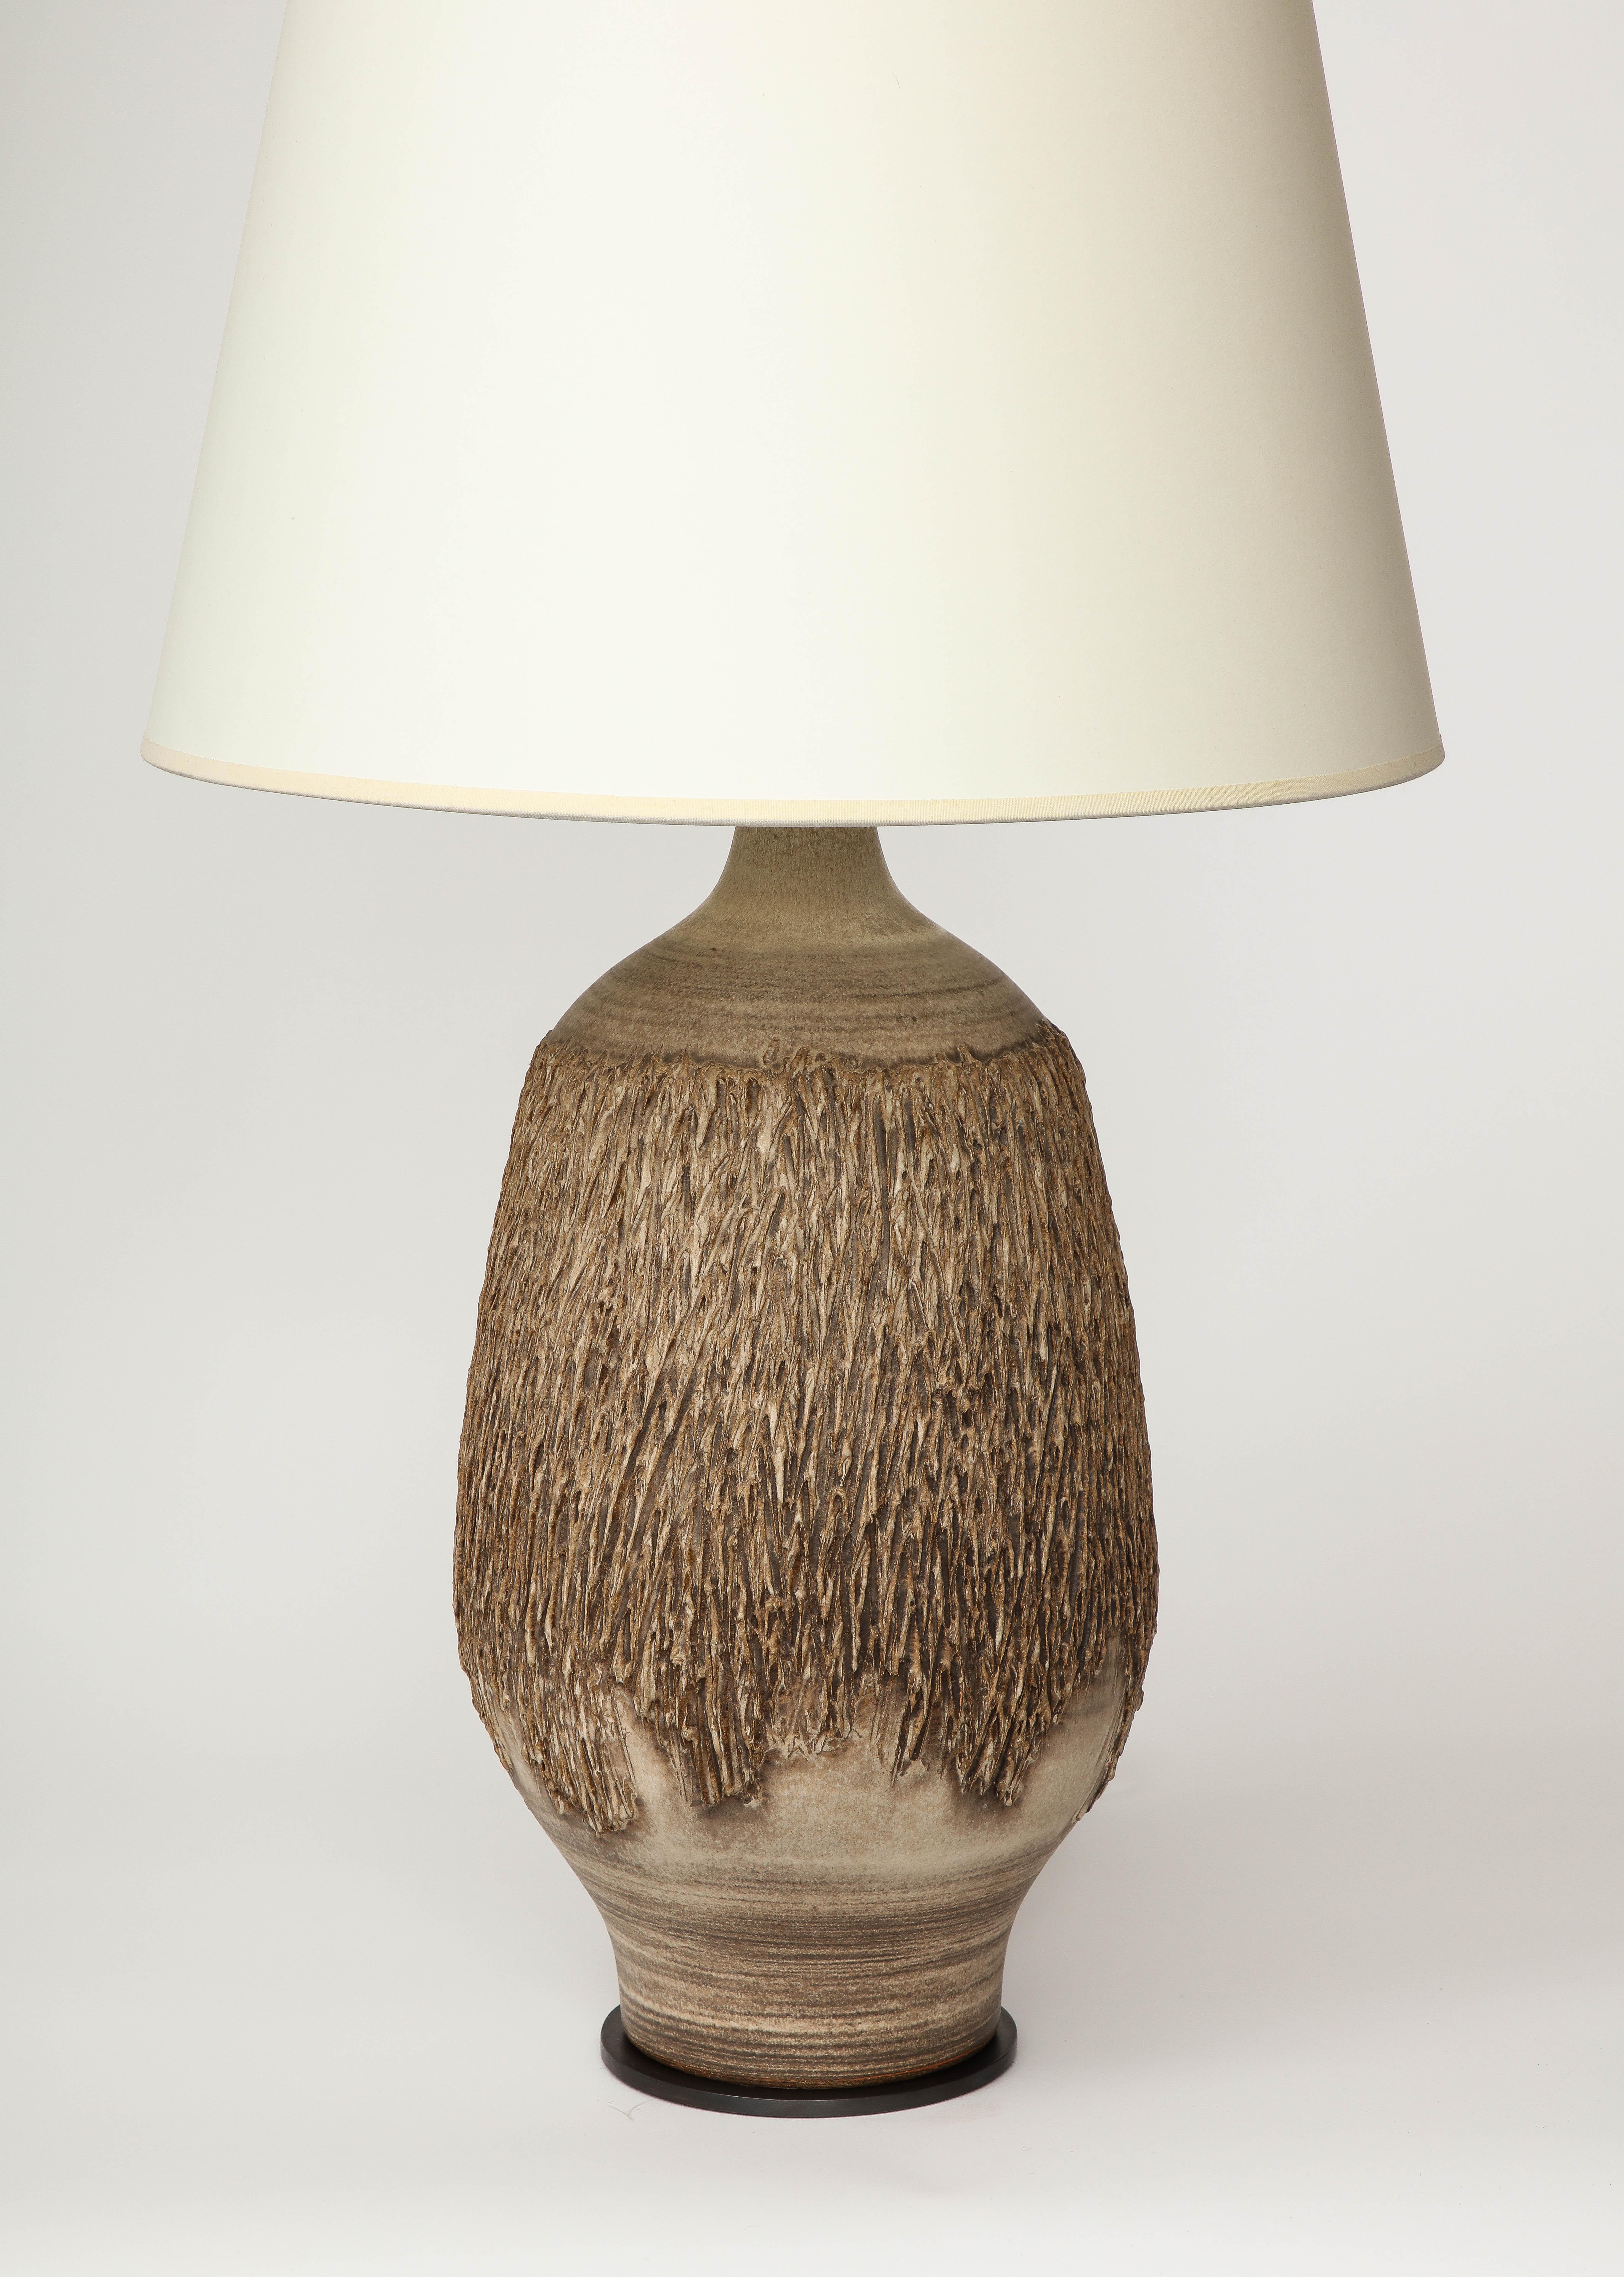 American Glazed Ceramic Table Lamp by Design Technics, United States, c. 1960 For Sale